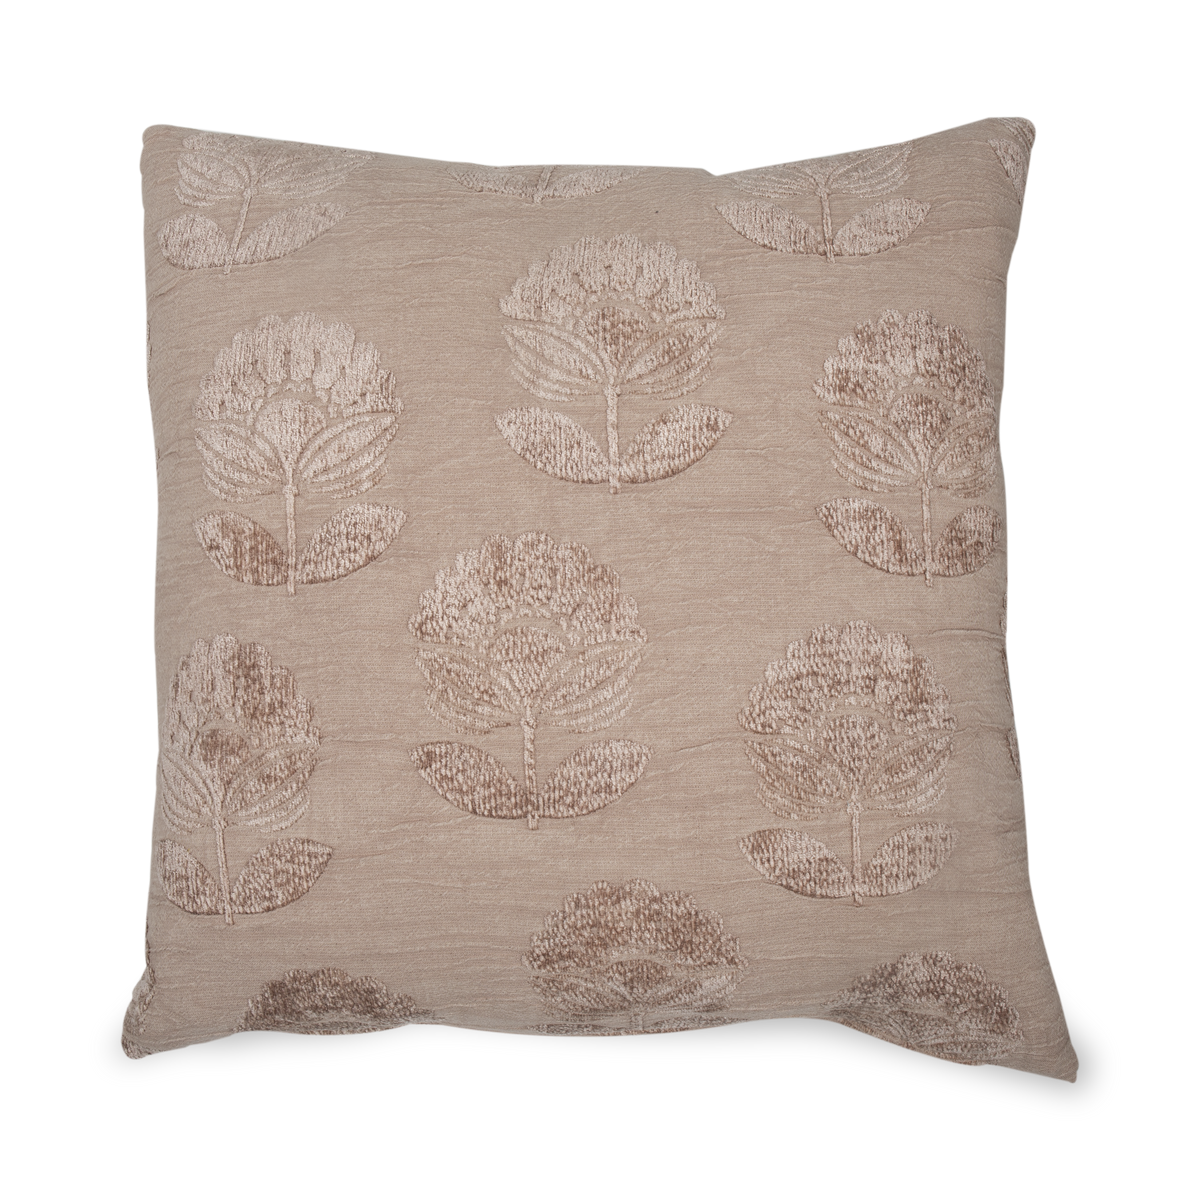 This pillow features a delicate lotus blossom pattern creating a beautifully textured feel.